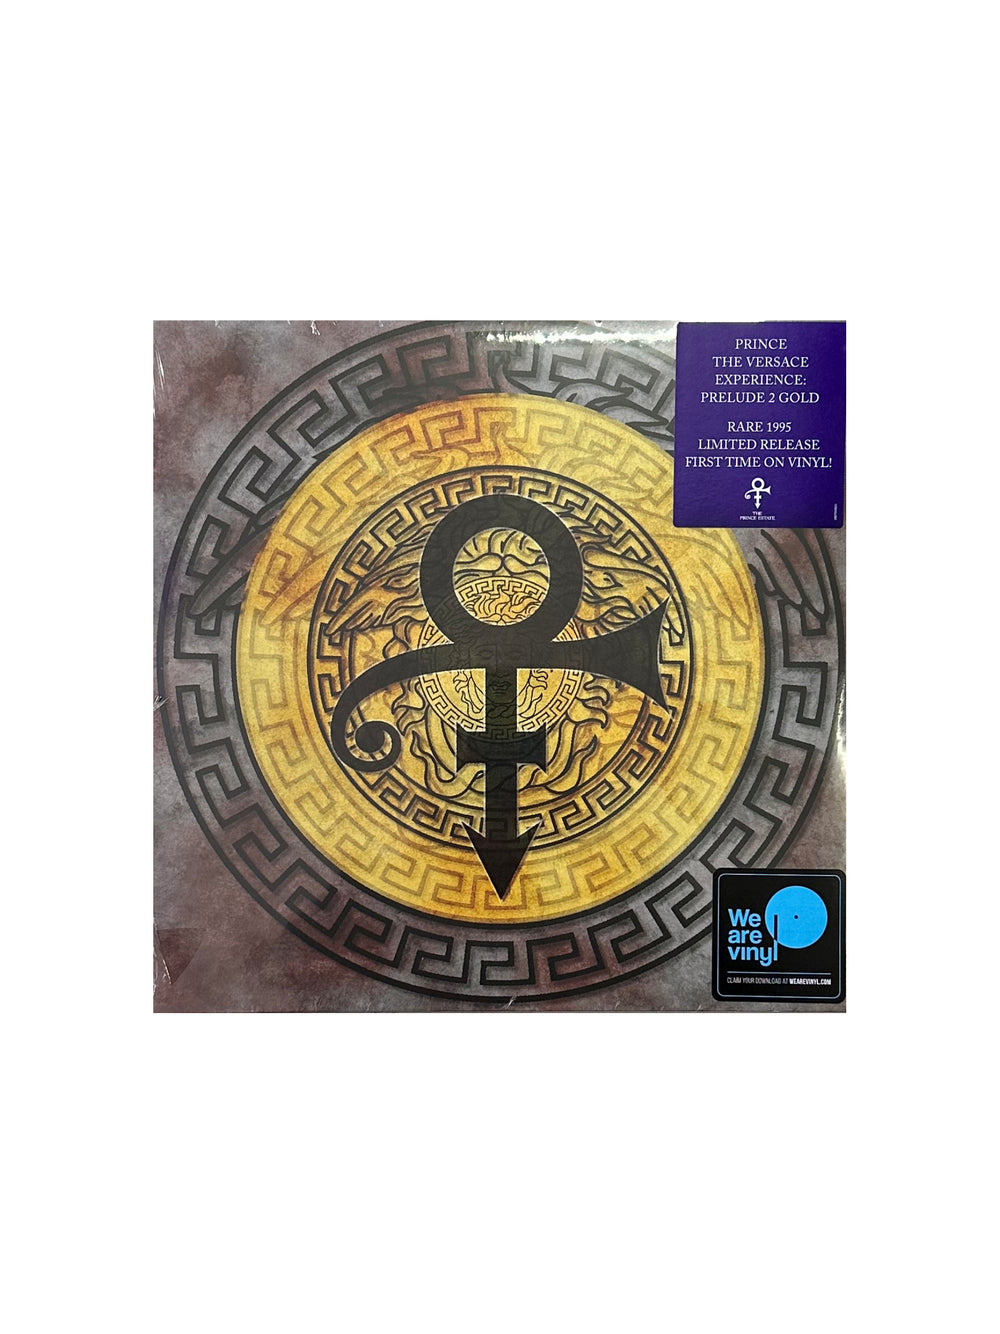 Prince – 0(+> The Versace Experience - Prelude 2 Gold Vinyl LP RE PU 150 EU NEW:2019